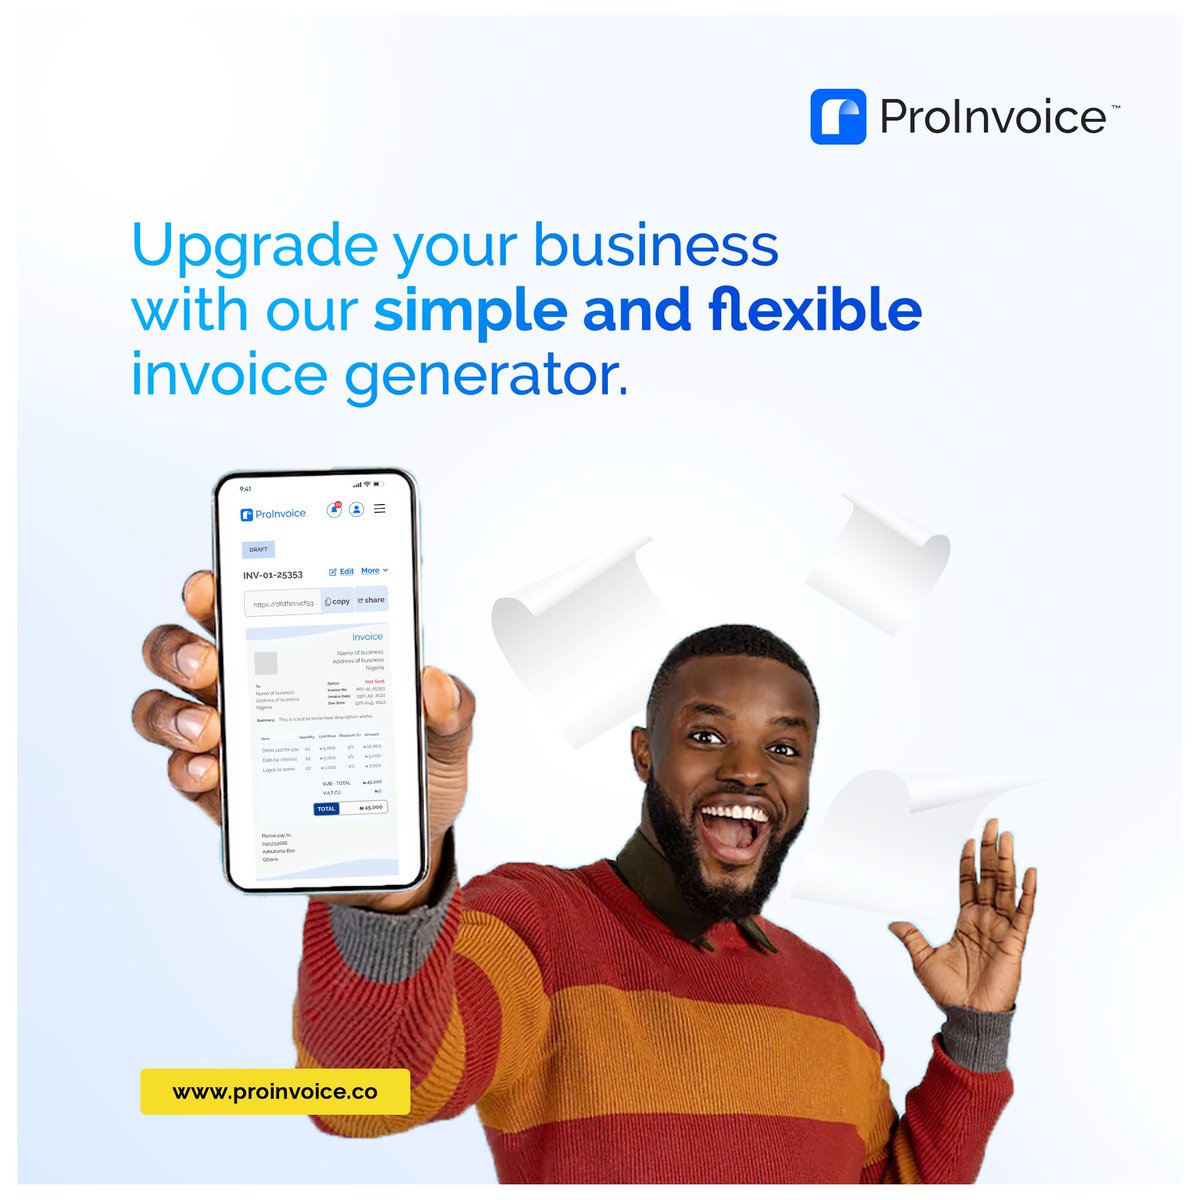 ProInvoice is a professional invoice 
generator perfect for businesses with a customer base of any size. The clean design and easy-to-use features make it an ideal way to create and send professional invoices to clients.

#invoicesoftware #invoicegenerator #proinvoicesoftware